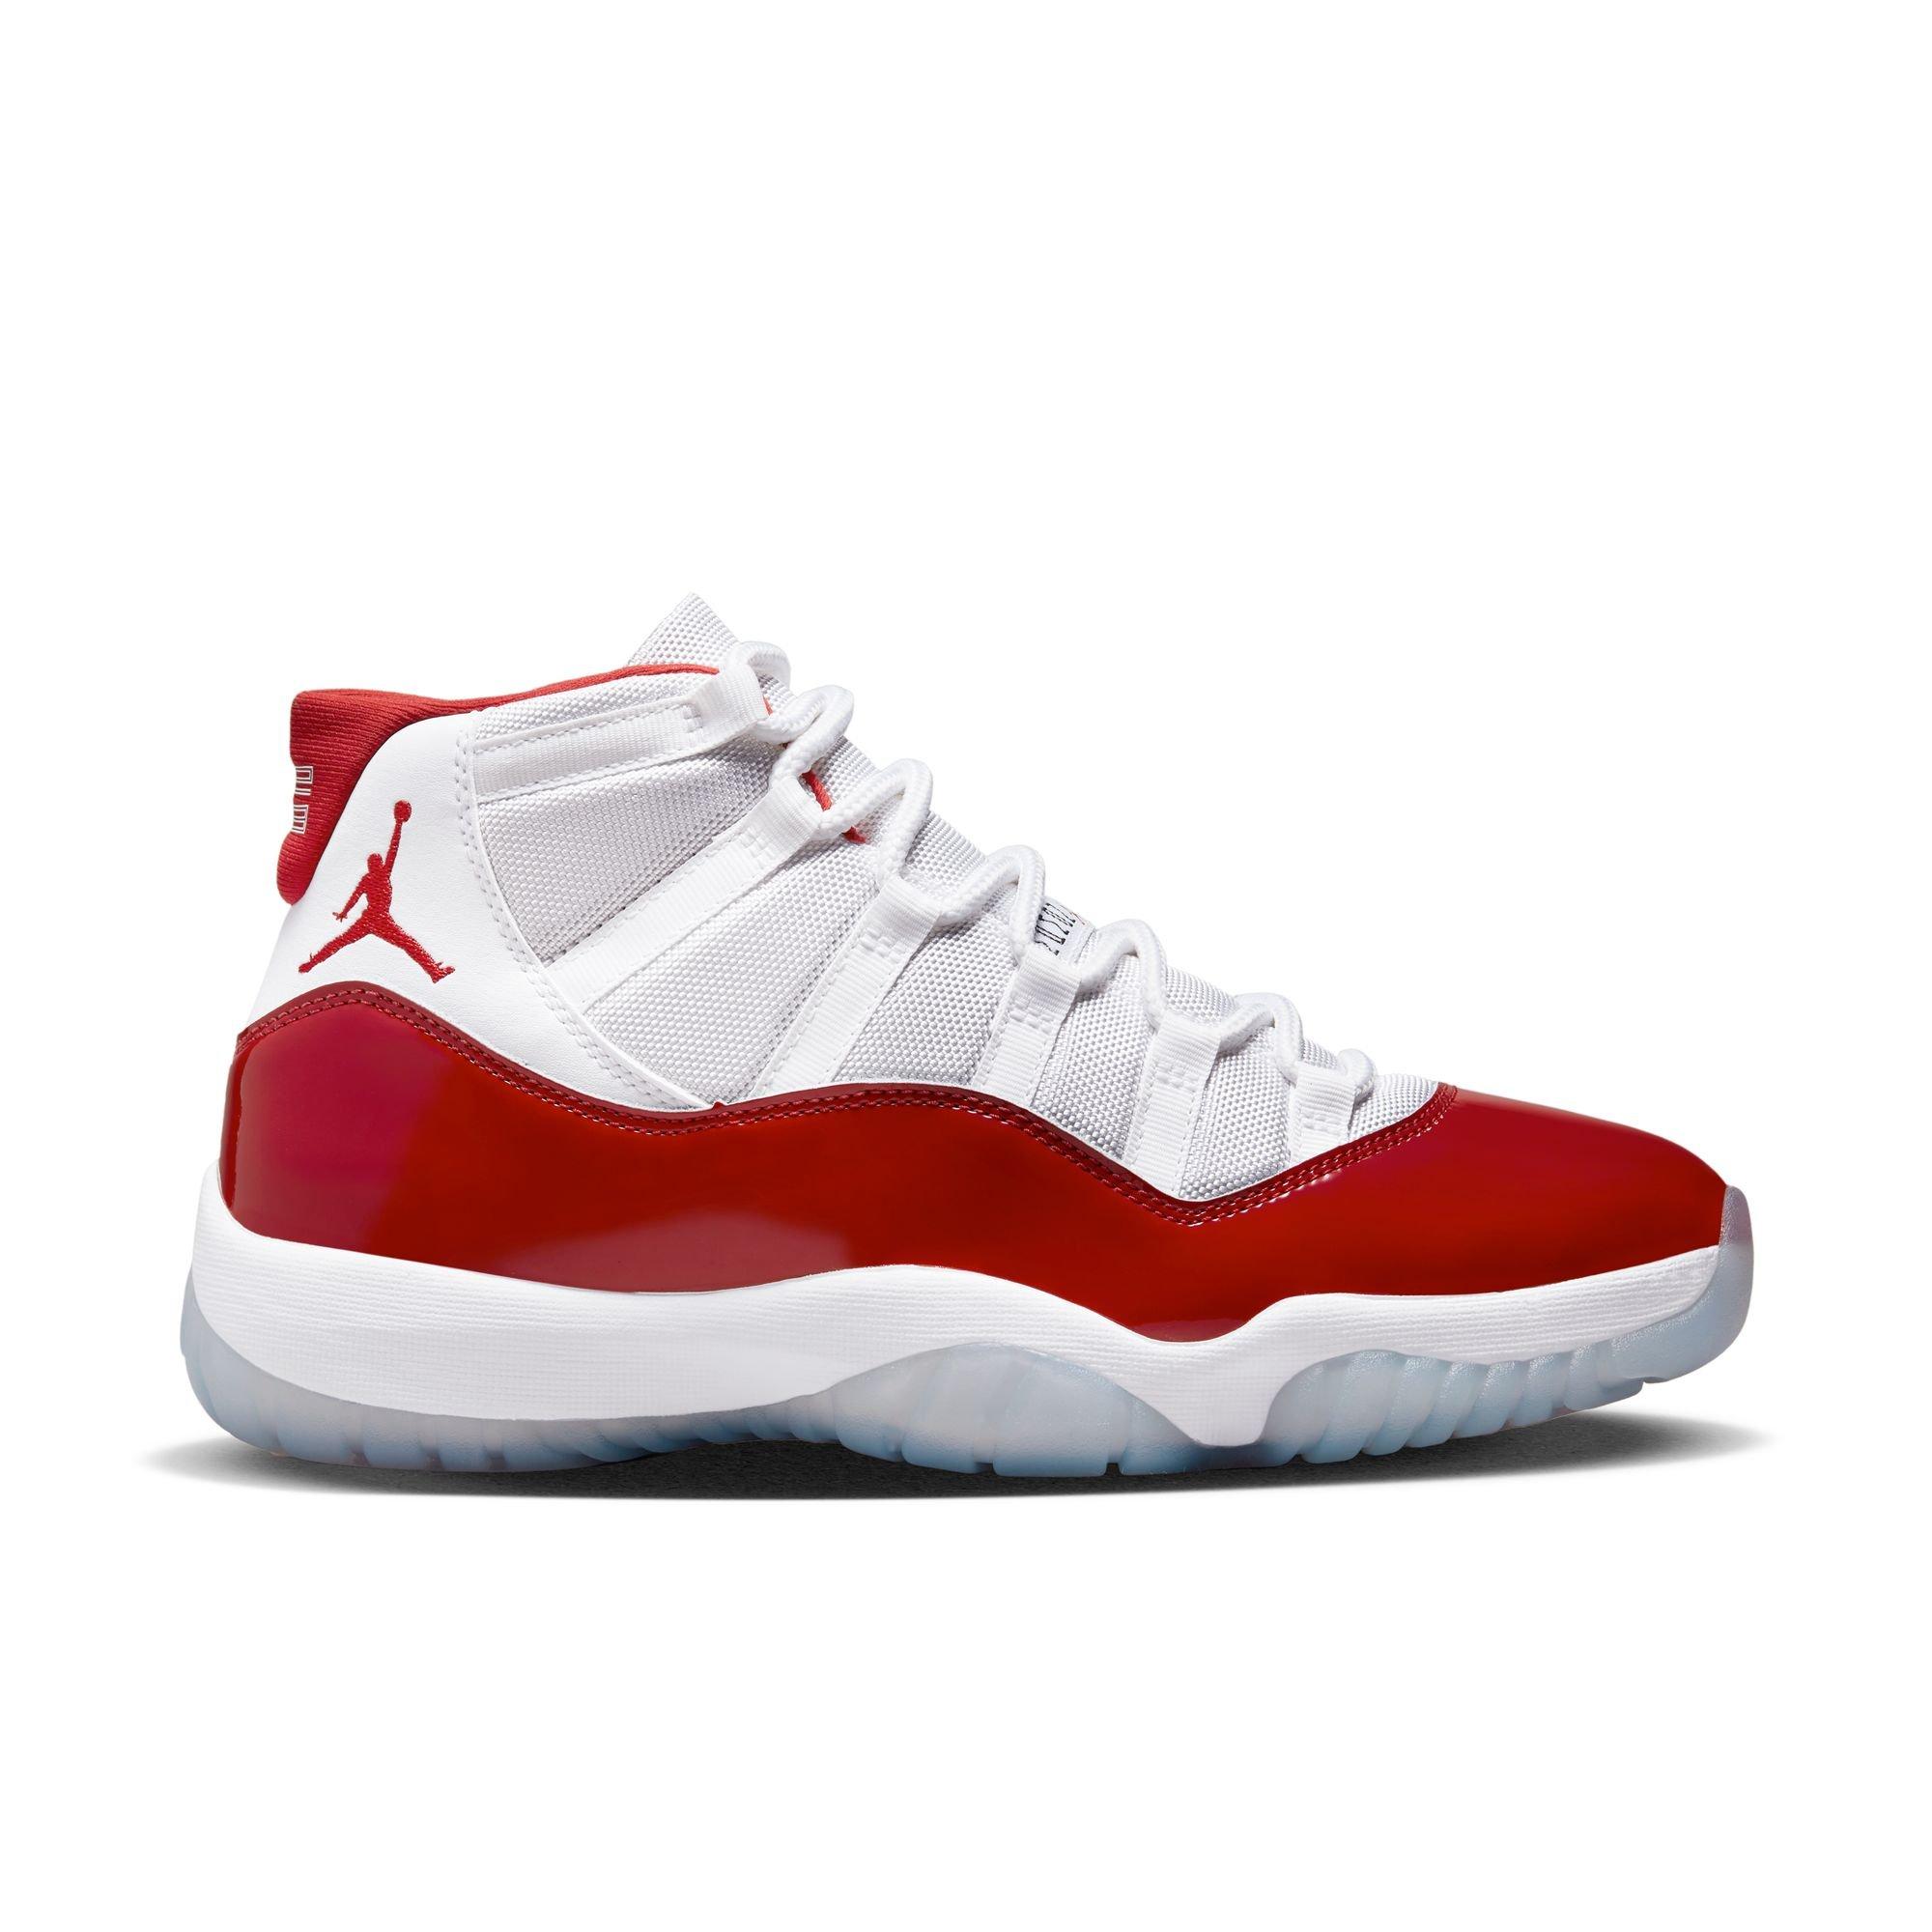 how much is the red and white jordans